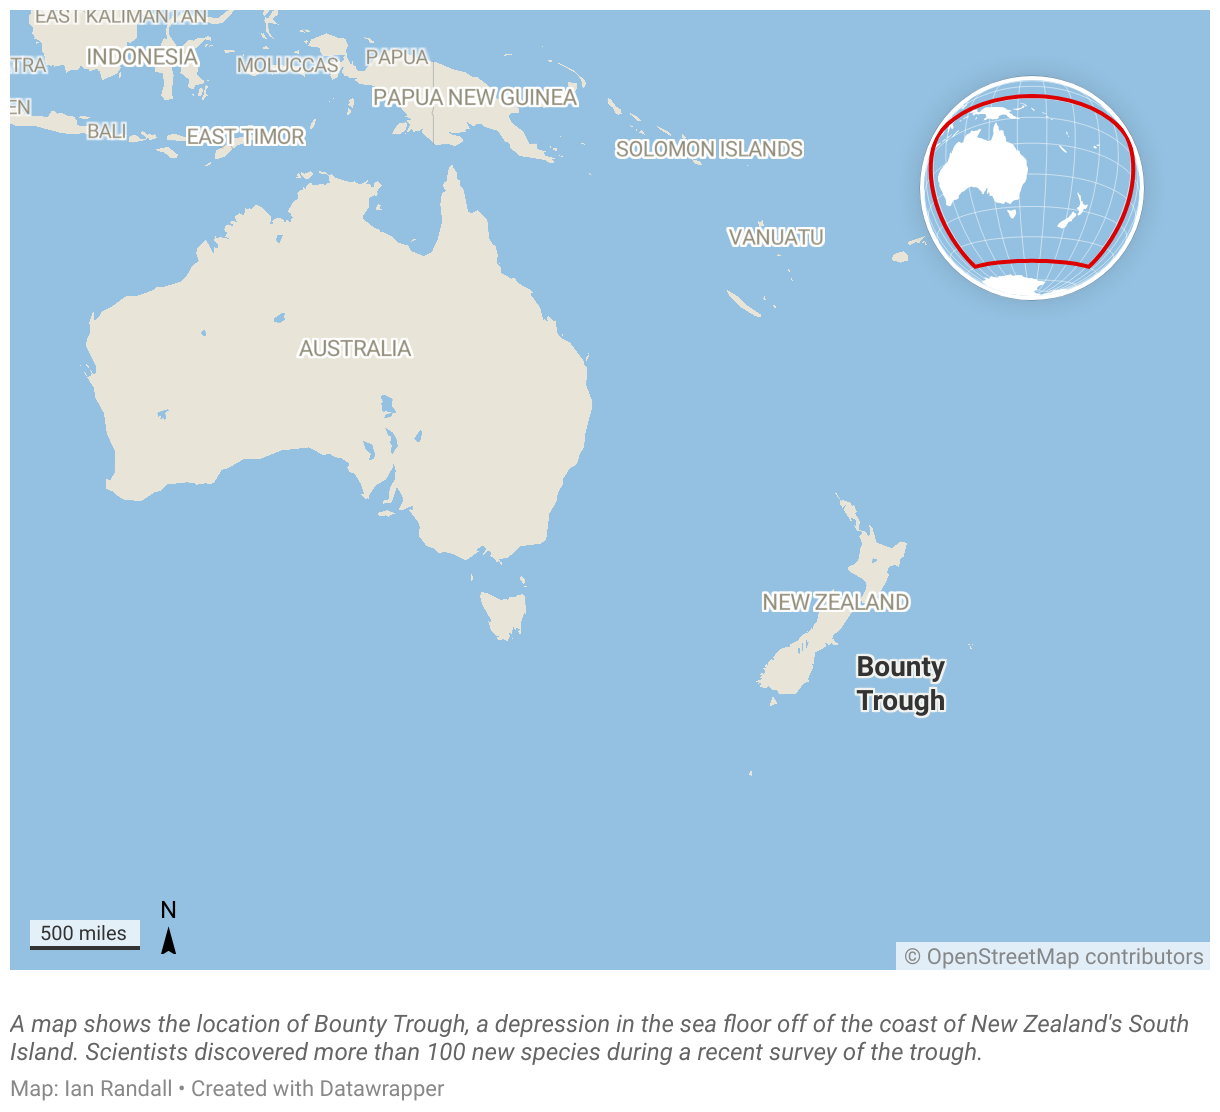 A map shows the location of Bounty Trough, a depression in the sea floor off of the coast of New Zealand's South Island.